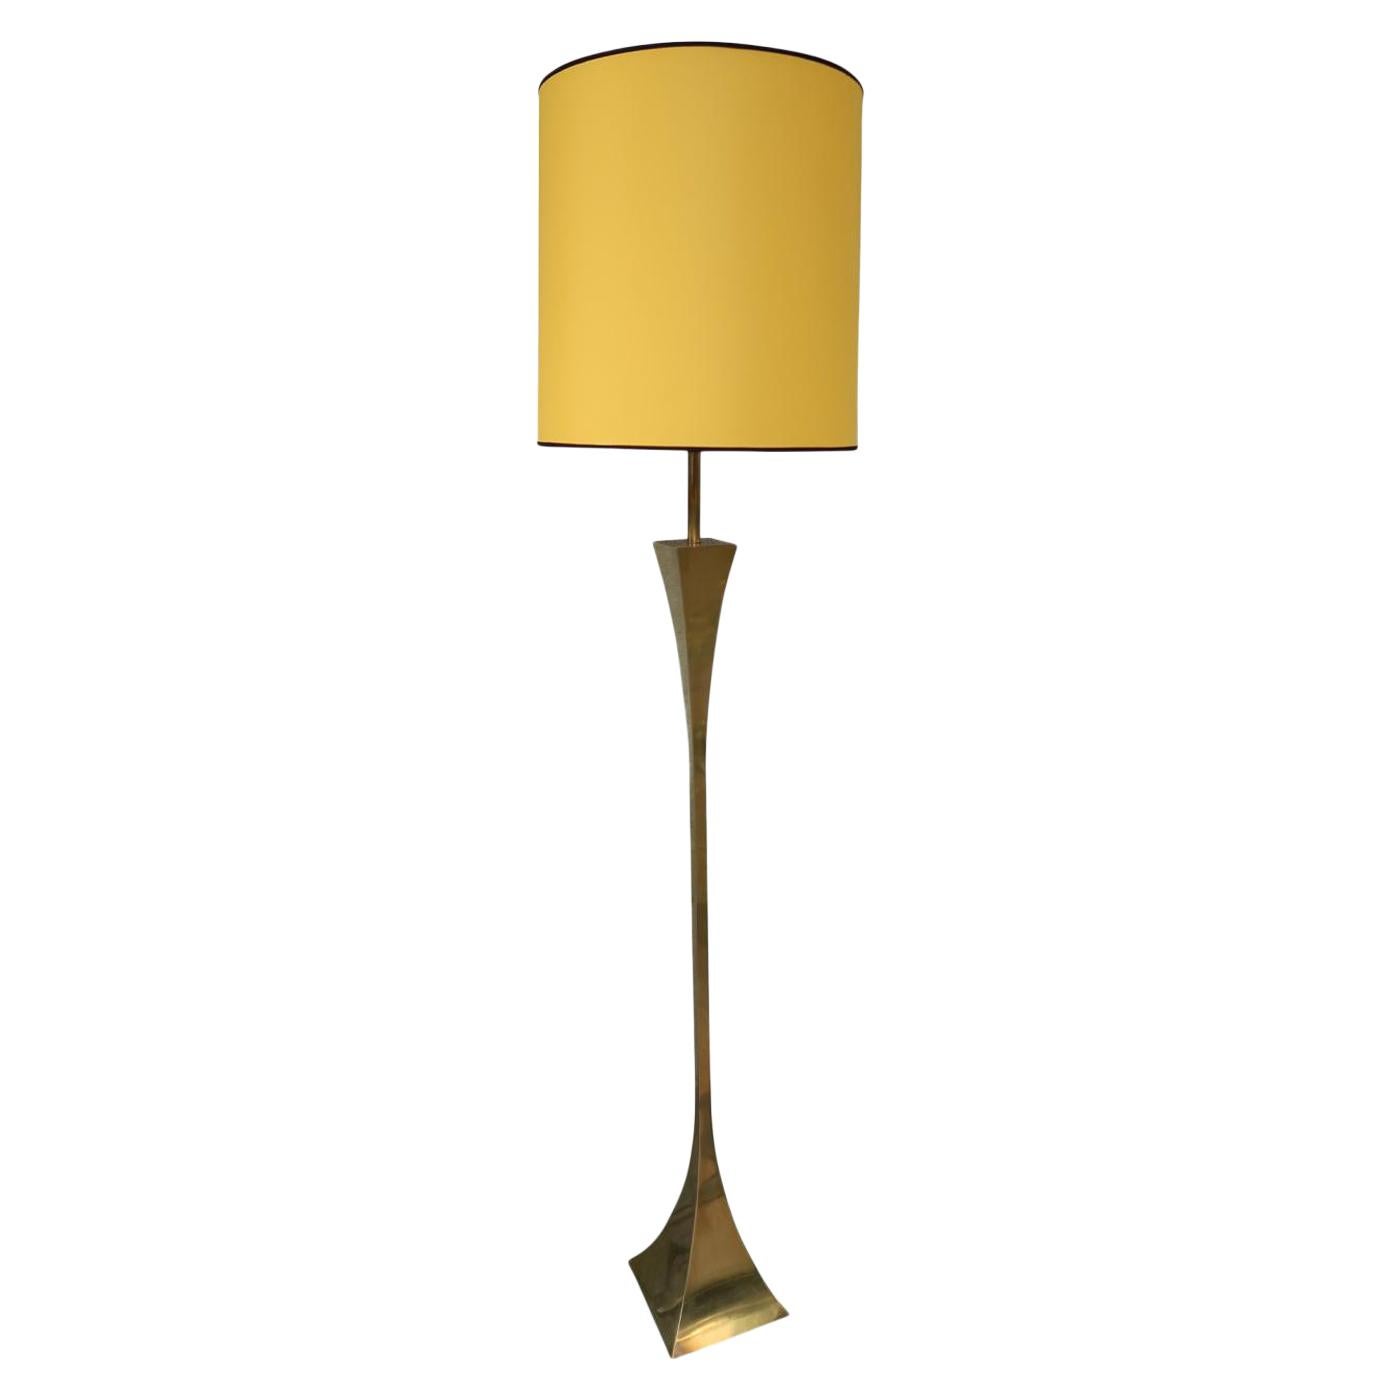 Montagna Grillo, Mod. Pyramid, Brass Midcentury Floor Lamp, Italy, 1970 For Sale